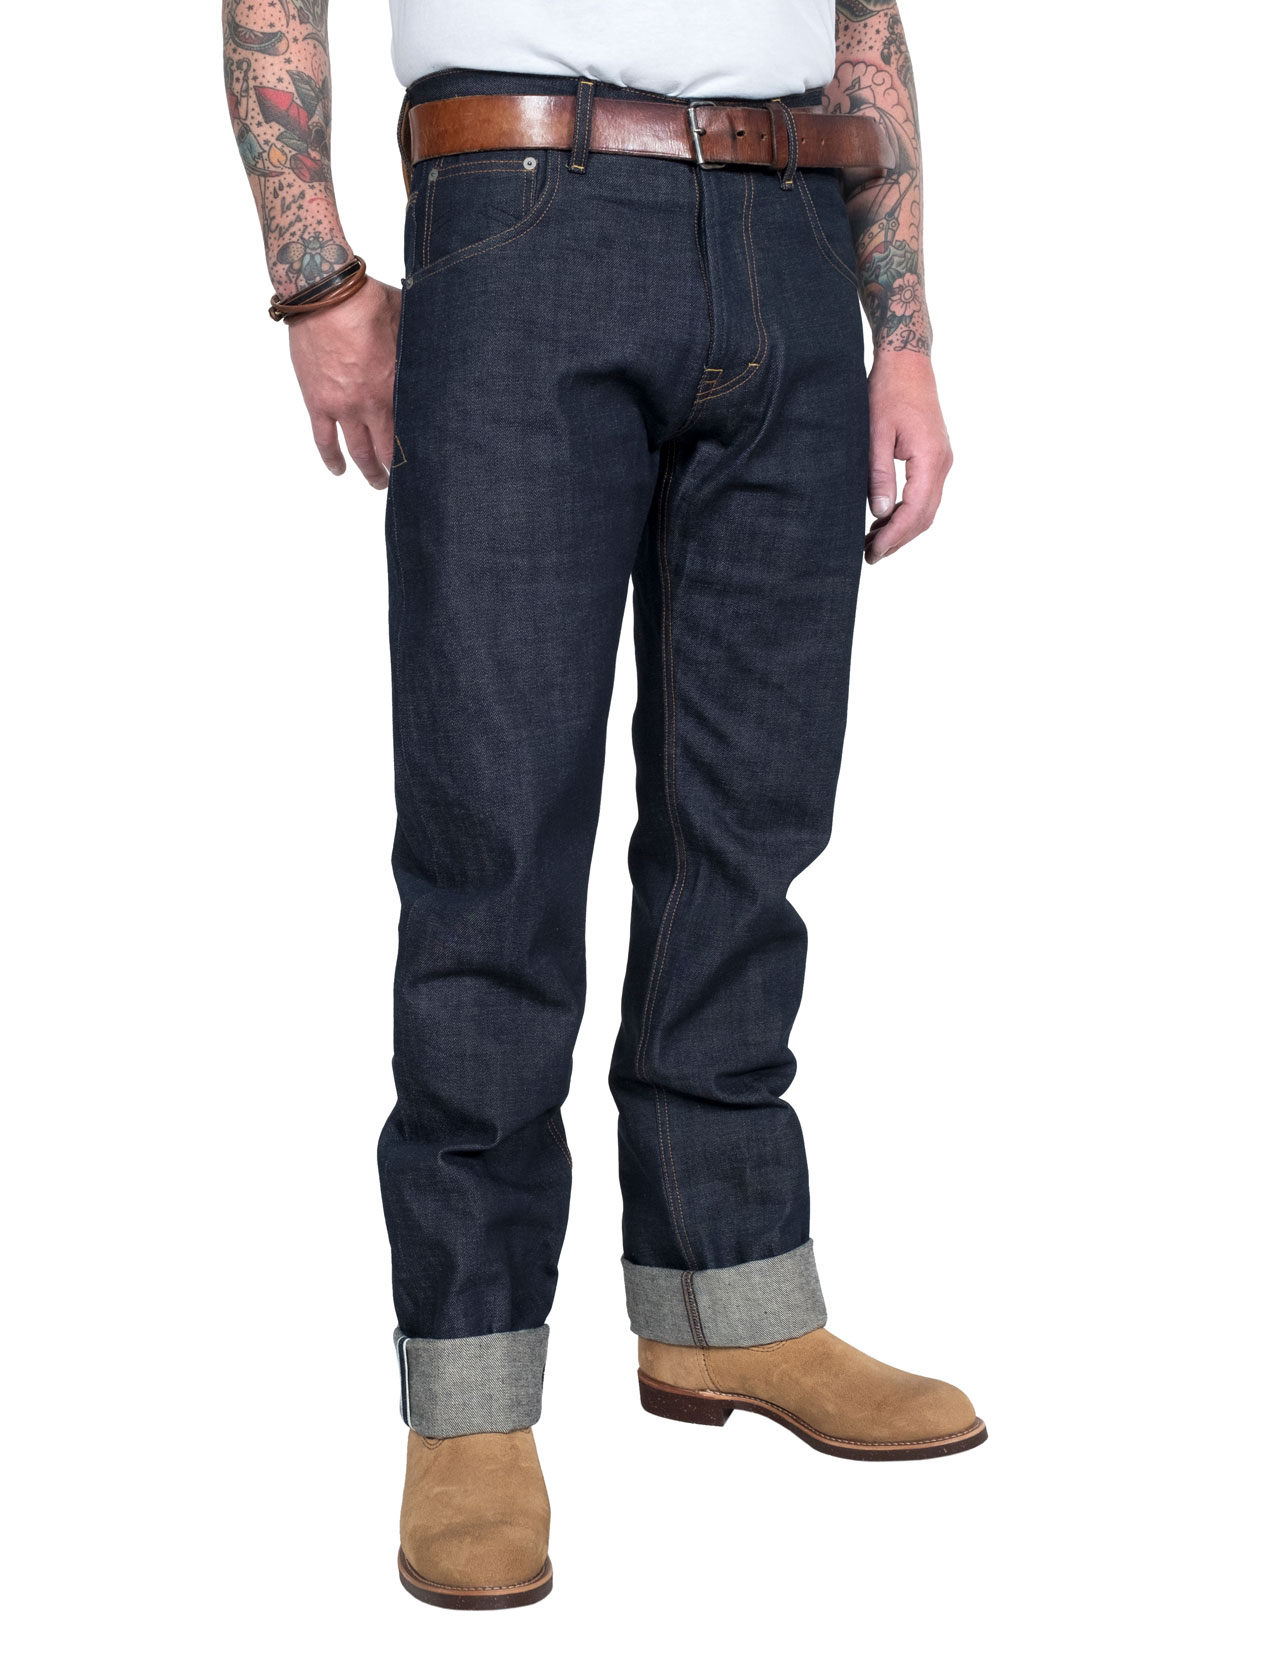 Eat Dust - Fit 67 Raw Selvage Jeans  - Indigo